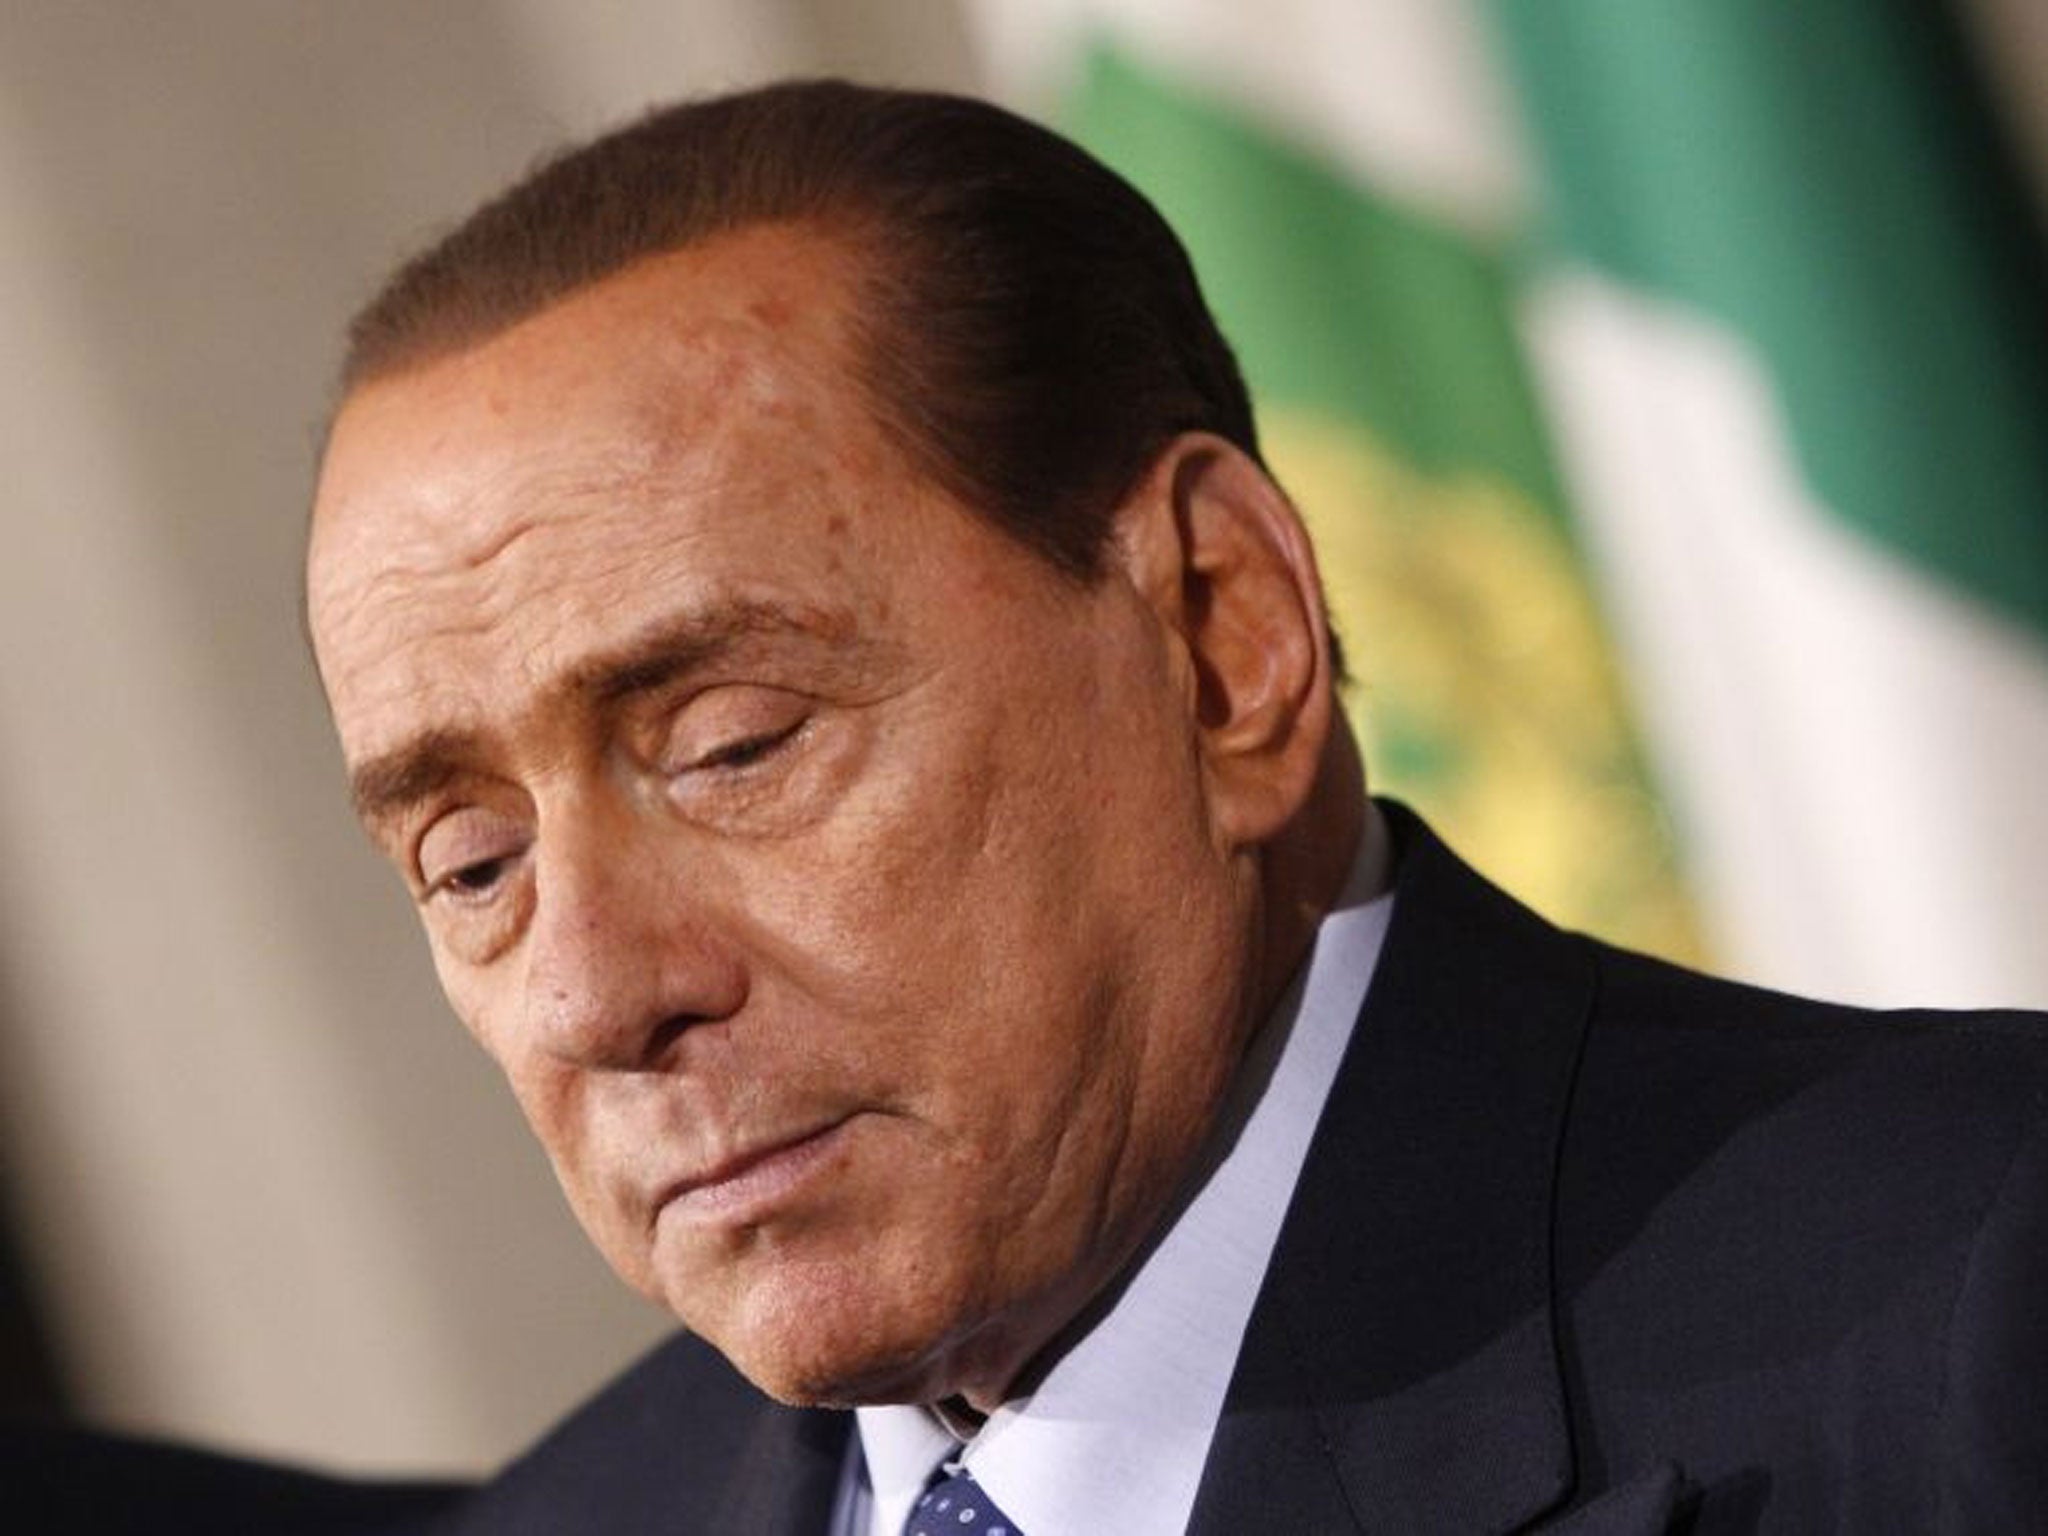 Silvio Berlusconi talks to journalists after a meeting with Italian President Giorgio Napolitano in February 2014.